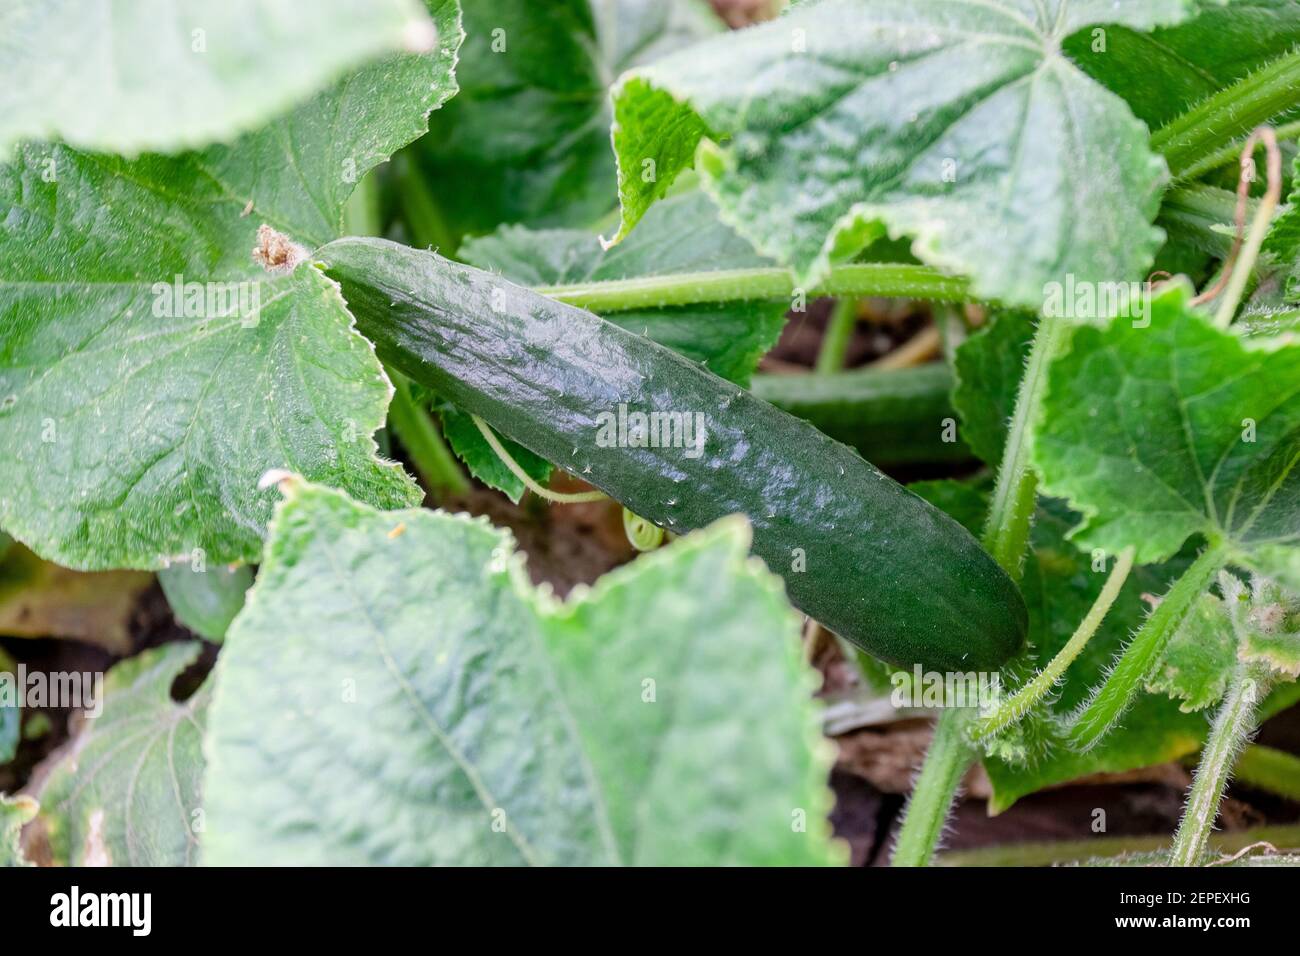 chinese cucumber slangen at garden bed. green and long vegetable cultivated at organic farm. agricultural concept Stock Photo